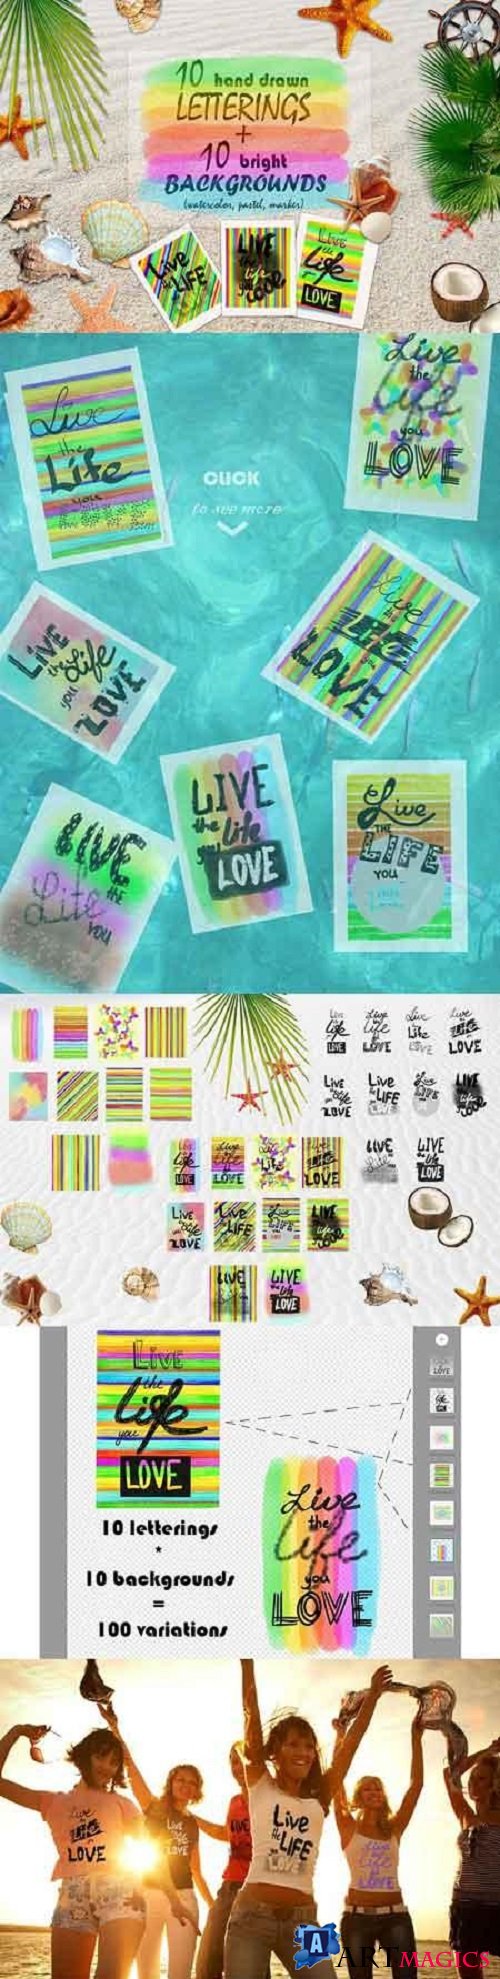 Lettering LIVE the LIFE you LOVE 1903874